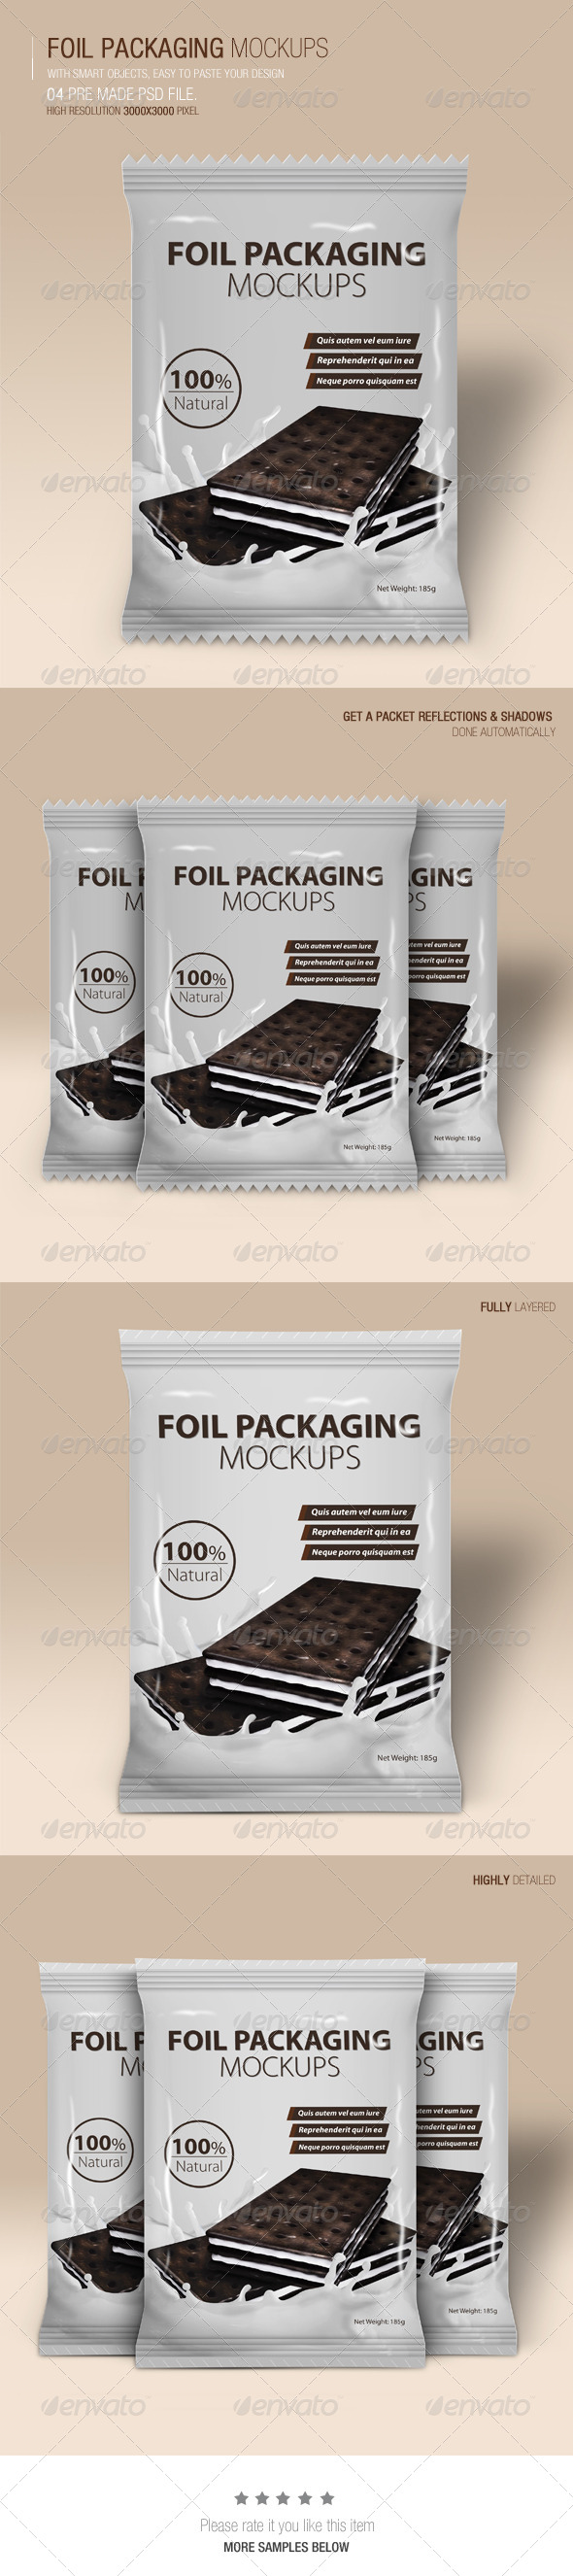 Download Foil Mockup Graphics Designs Templates From Graphicriver PSD Mockup Templates